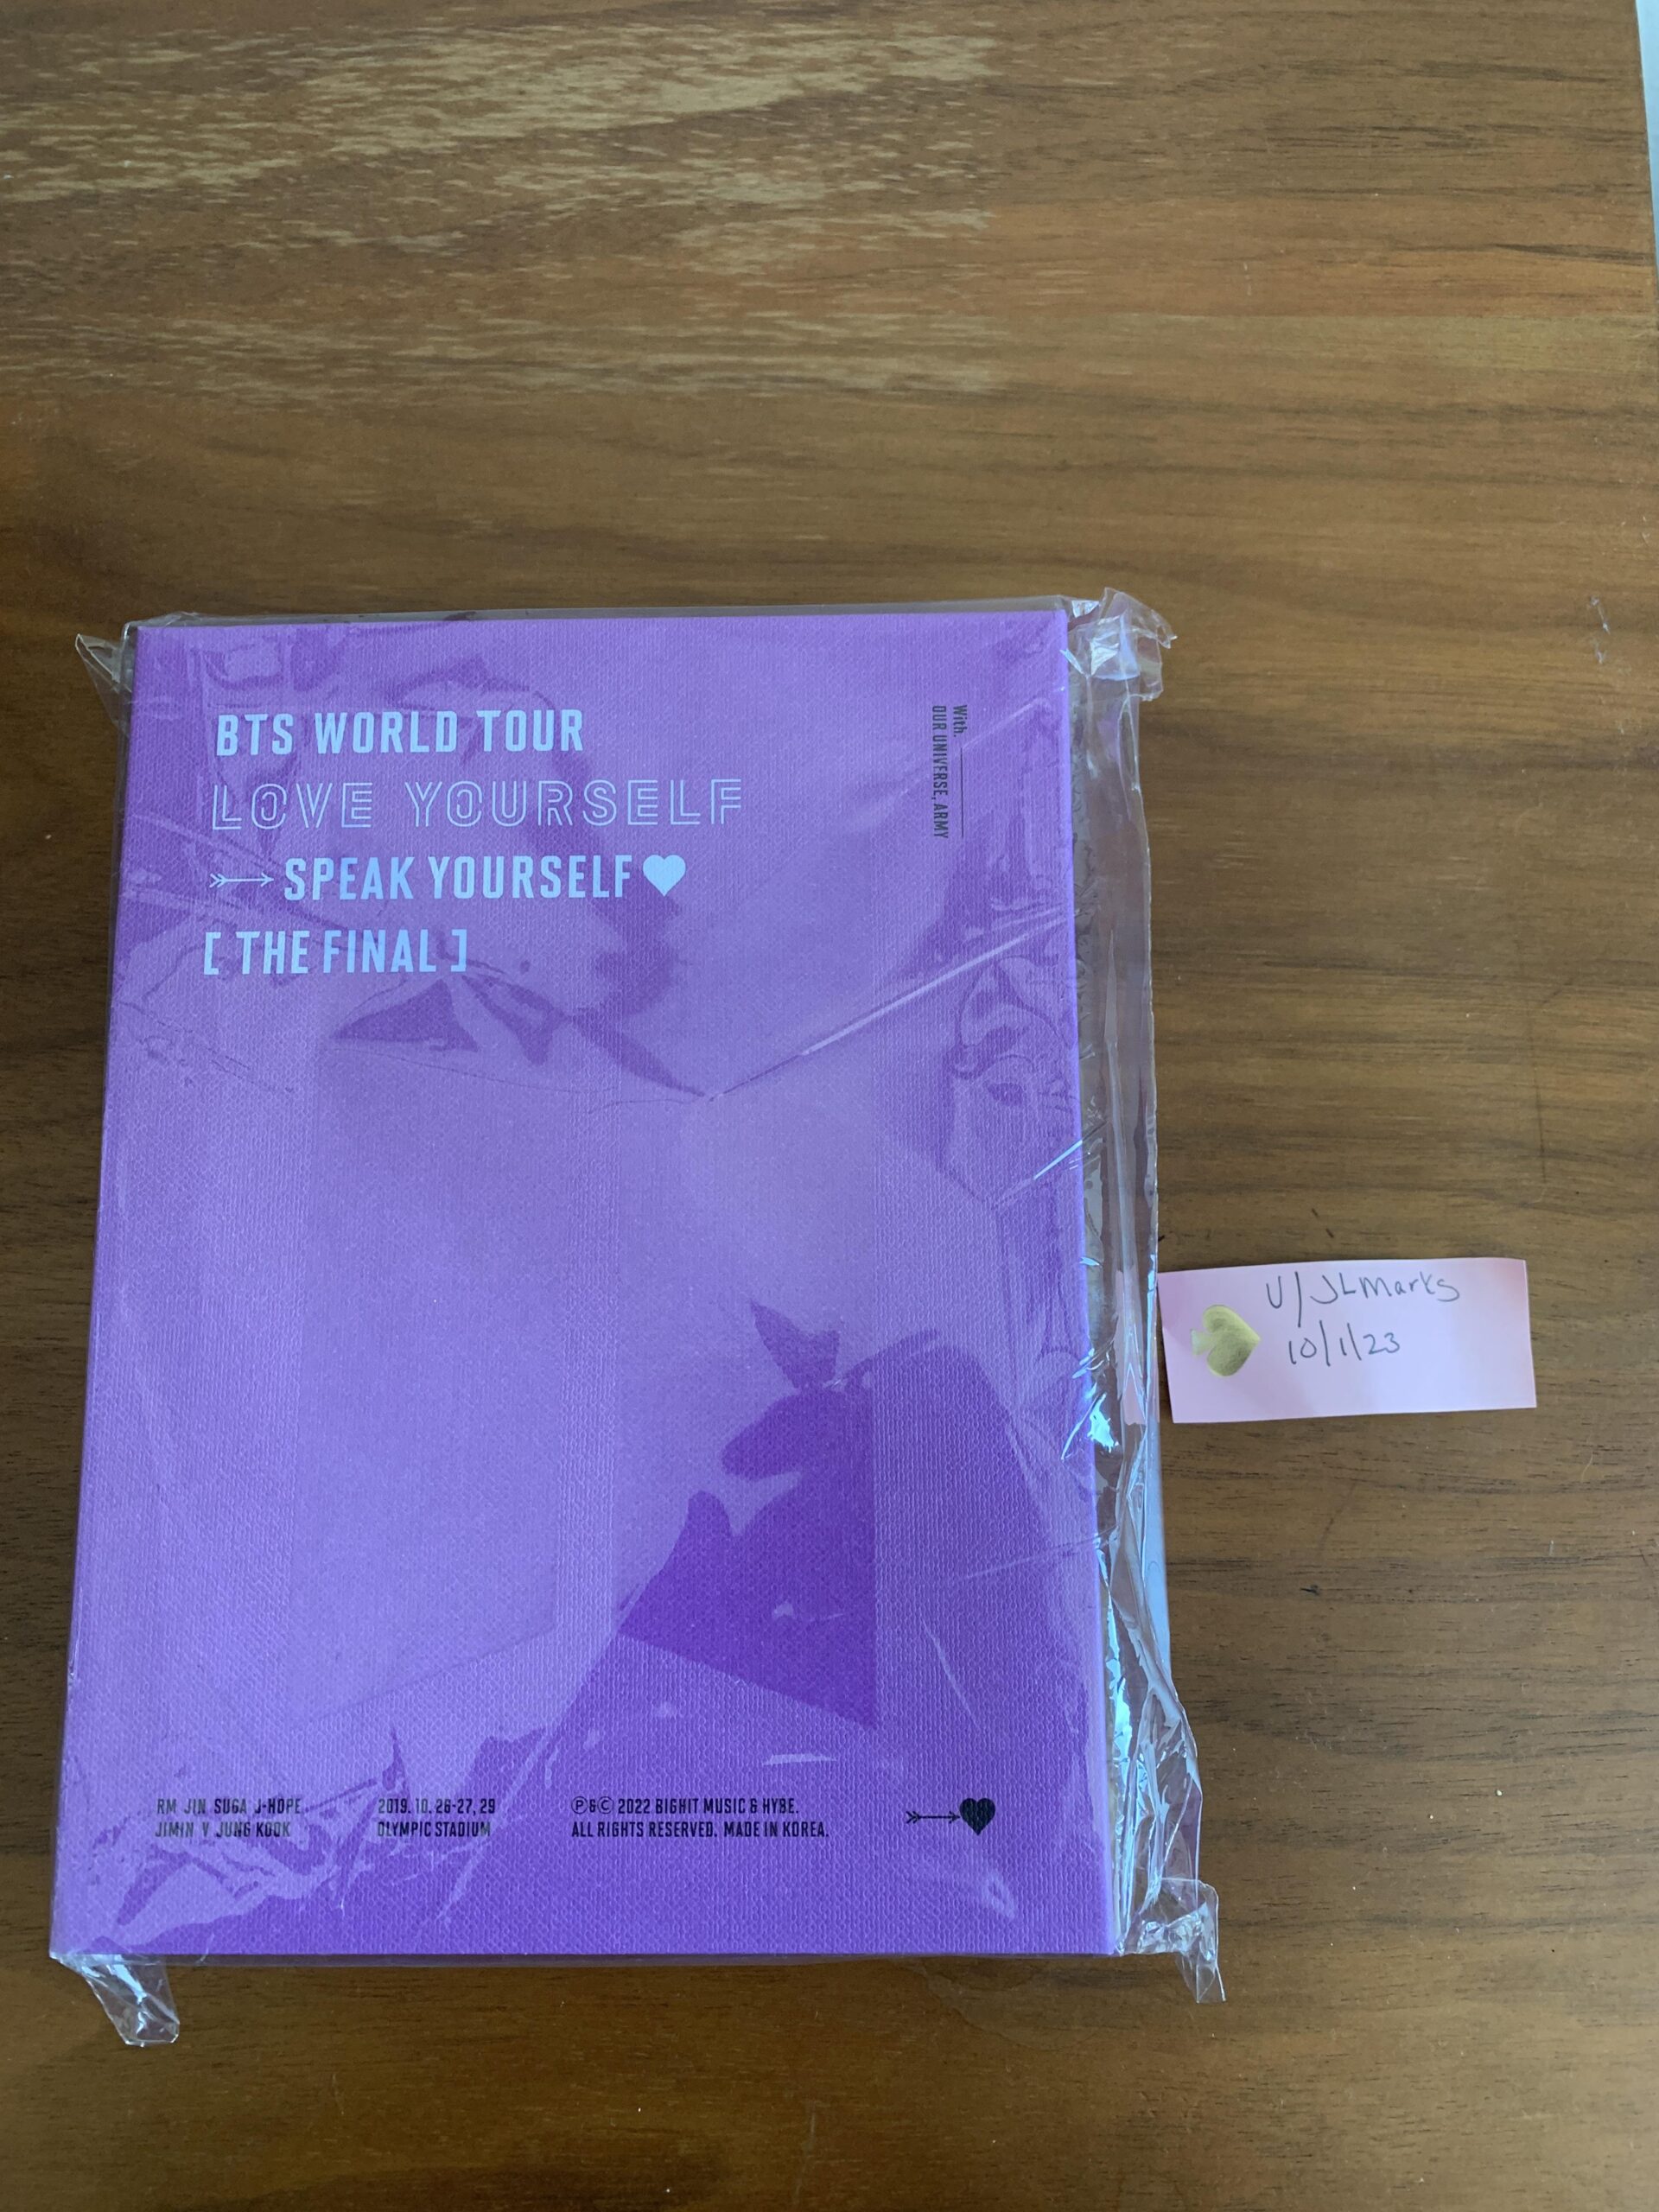 [SELLING USA,USA] BTS World Tour ‘Love Yourself, Speak Yourself’ [The Final] Digital Code